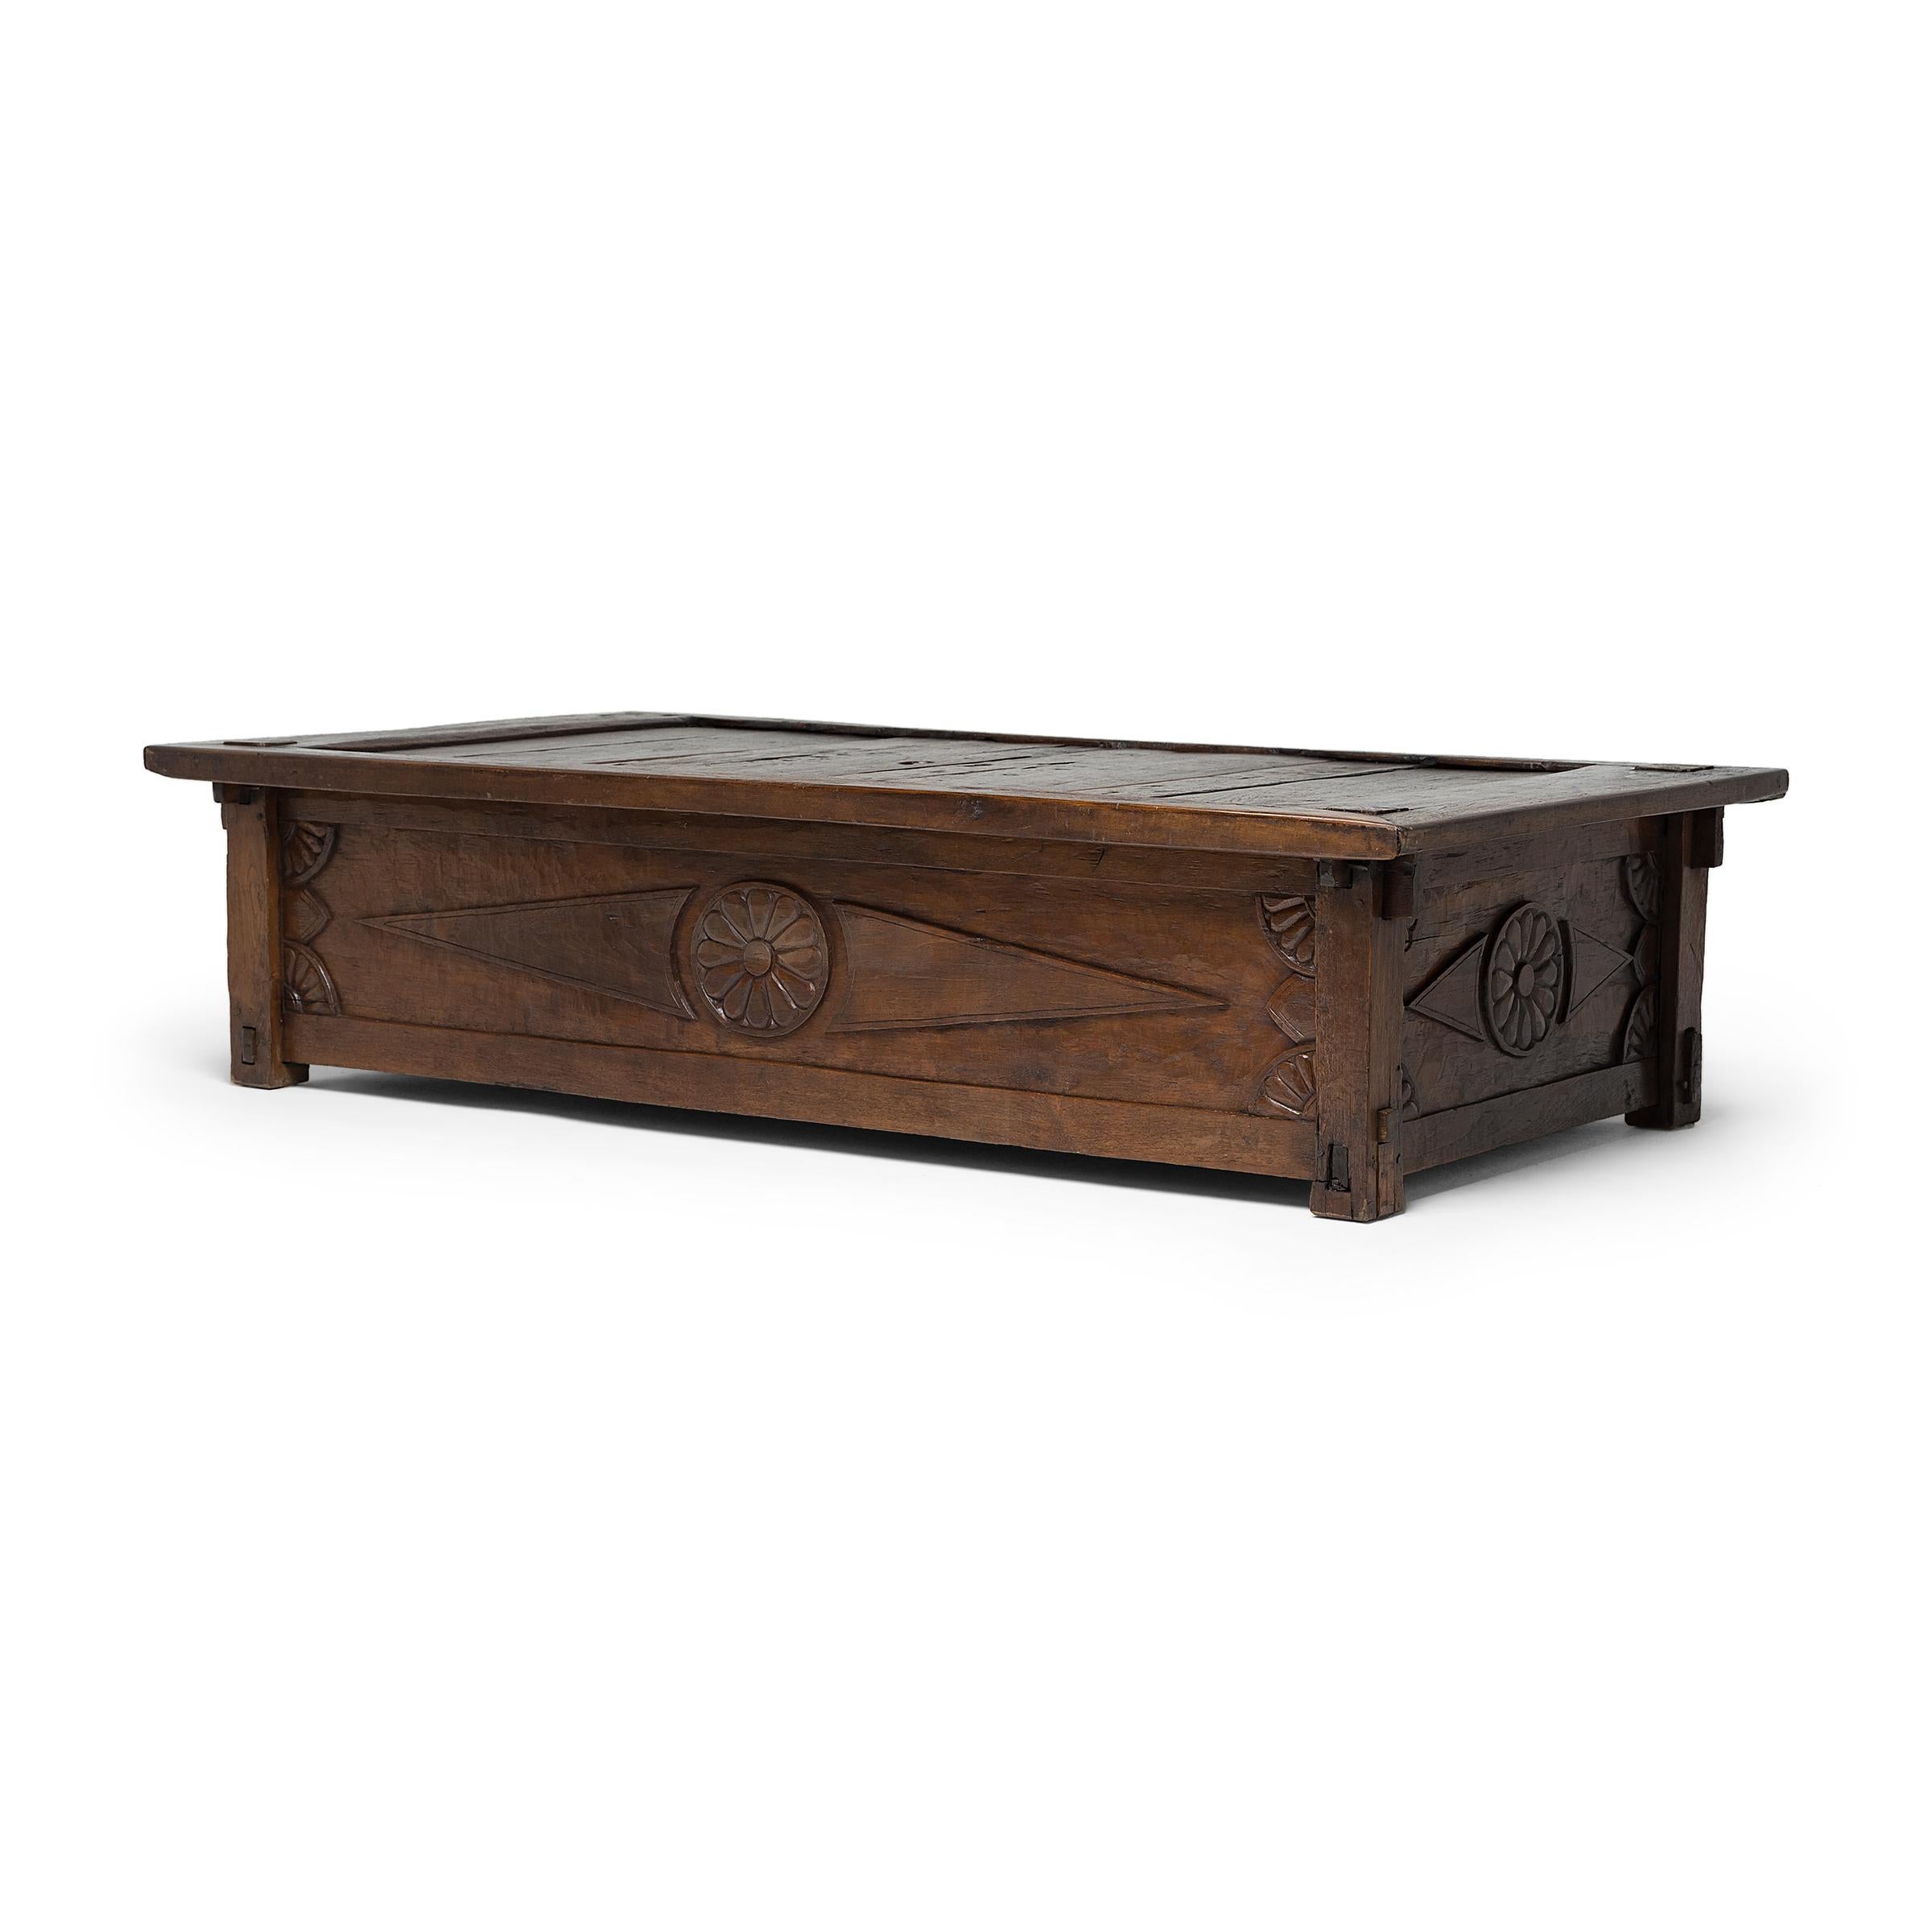 Rustic Indonesian Teak Rice Bed, c. 1900 For Sale